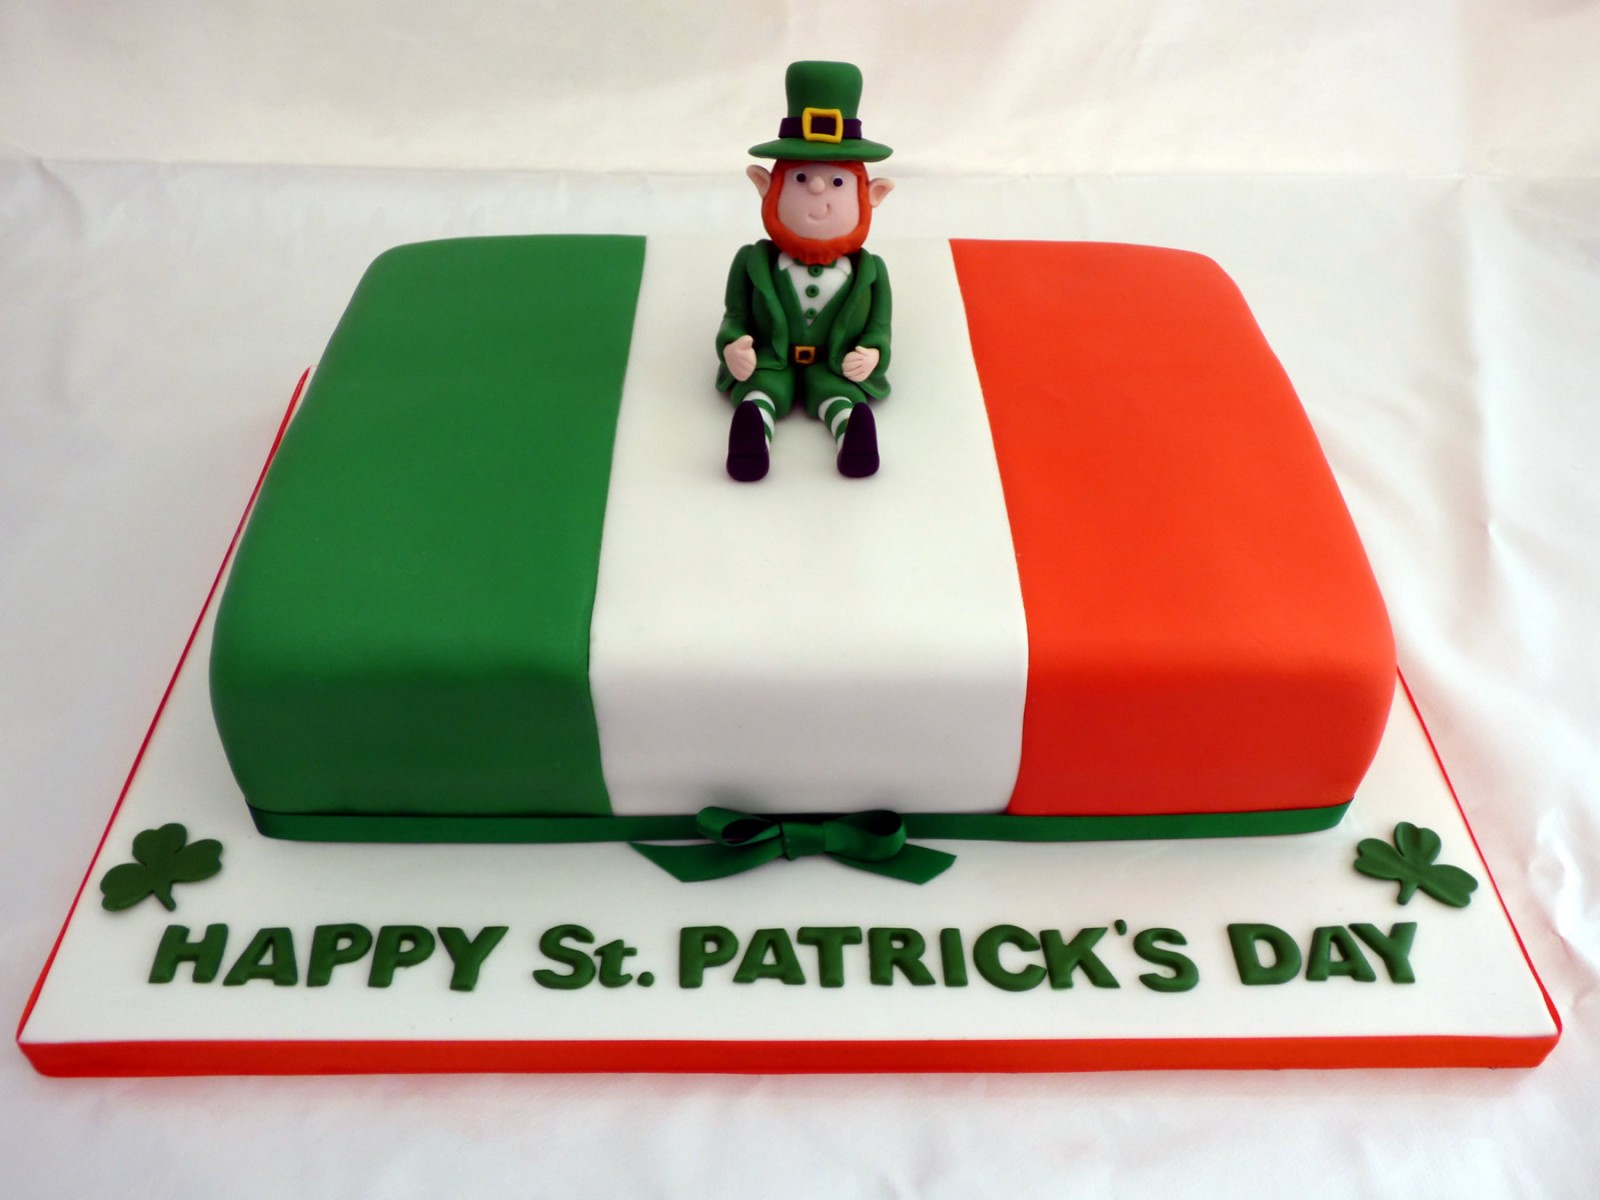 DIY St. Patrick’s Day Cake: A Festive Home Improvement For Your Kitchen